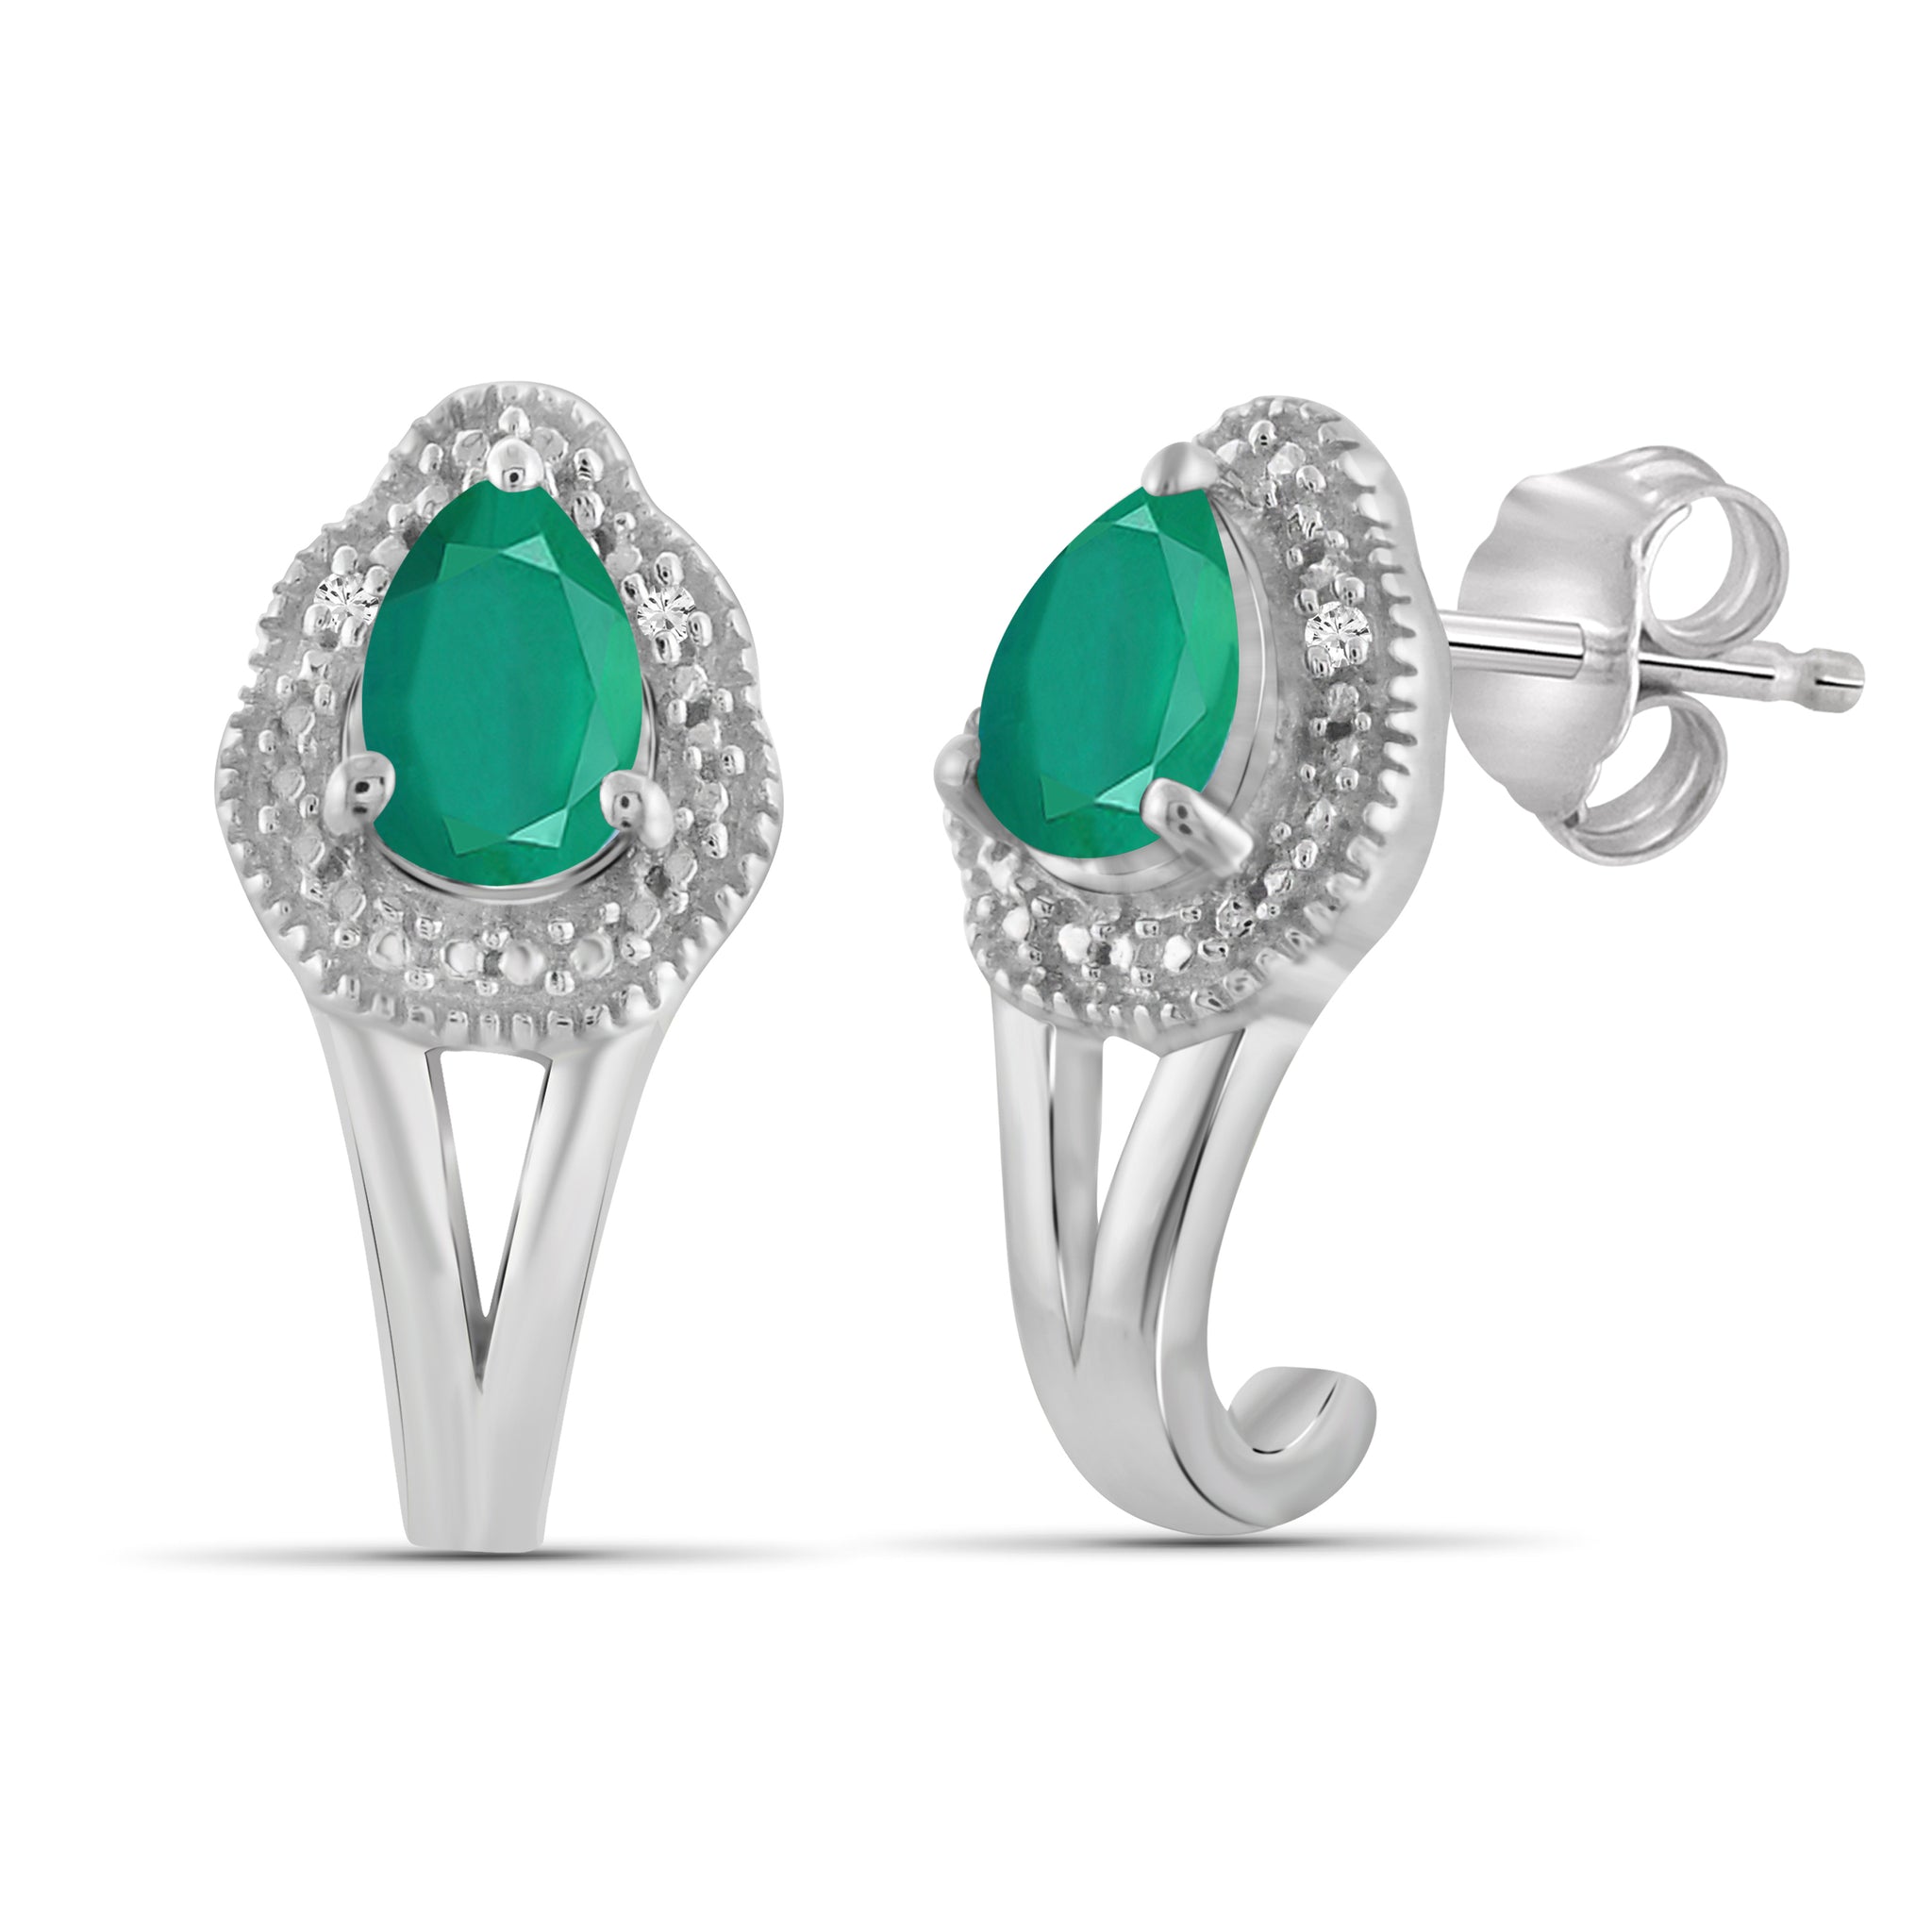 JewelonFire 1.20 Carat T.G.W. Genuine Emerald And Accent White Diamond Sterling Silver J-Hoop Earrings - Assorted Colors